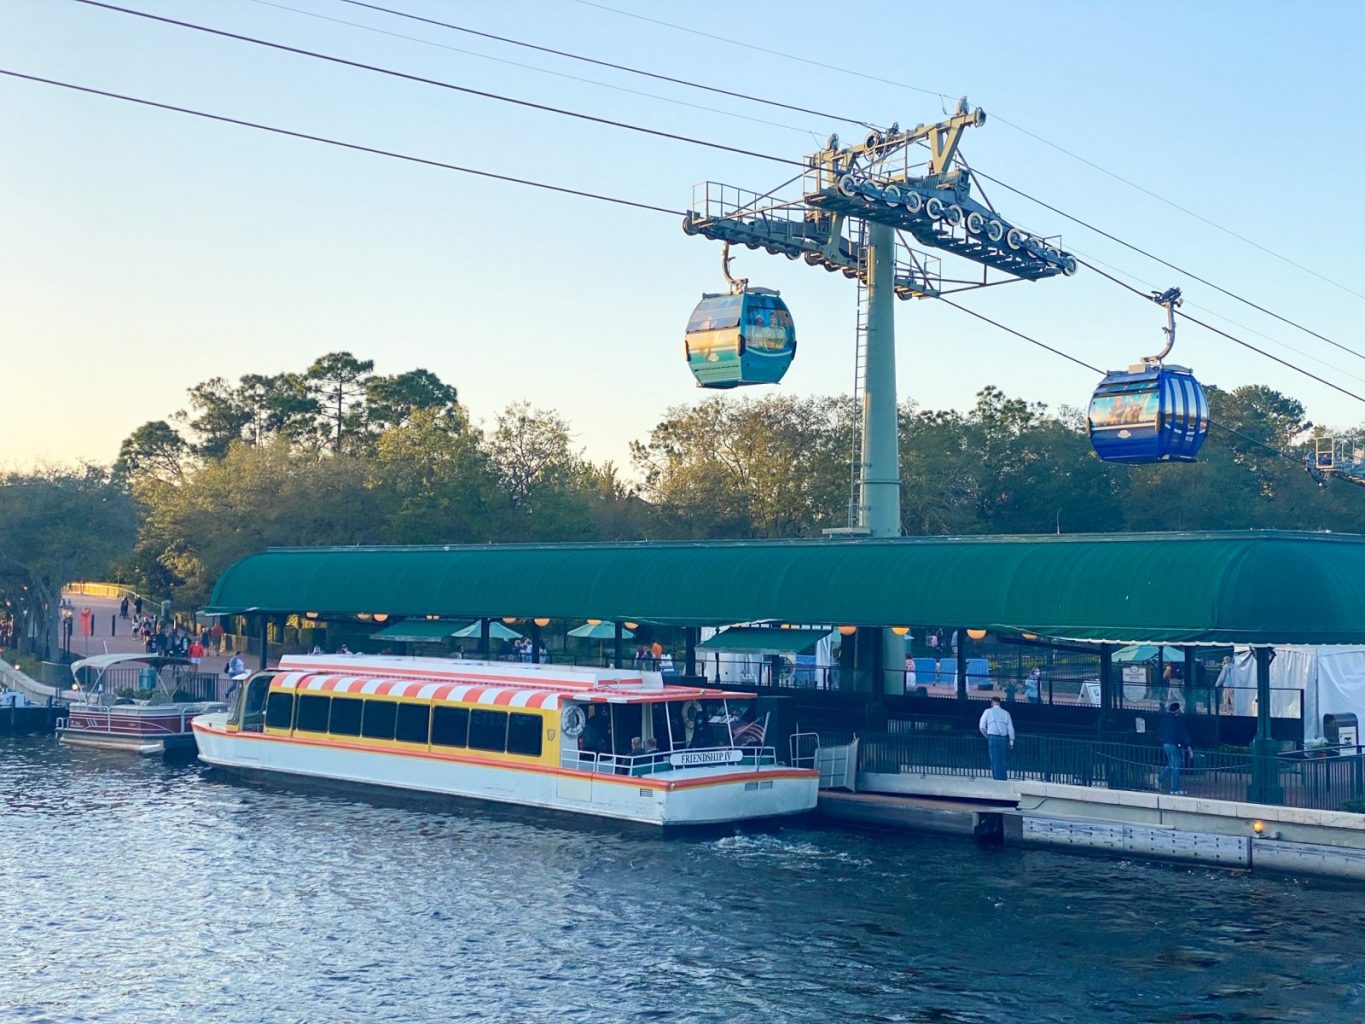 The friendship boats and Skyliner to get to the Epcot International Gateway